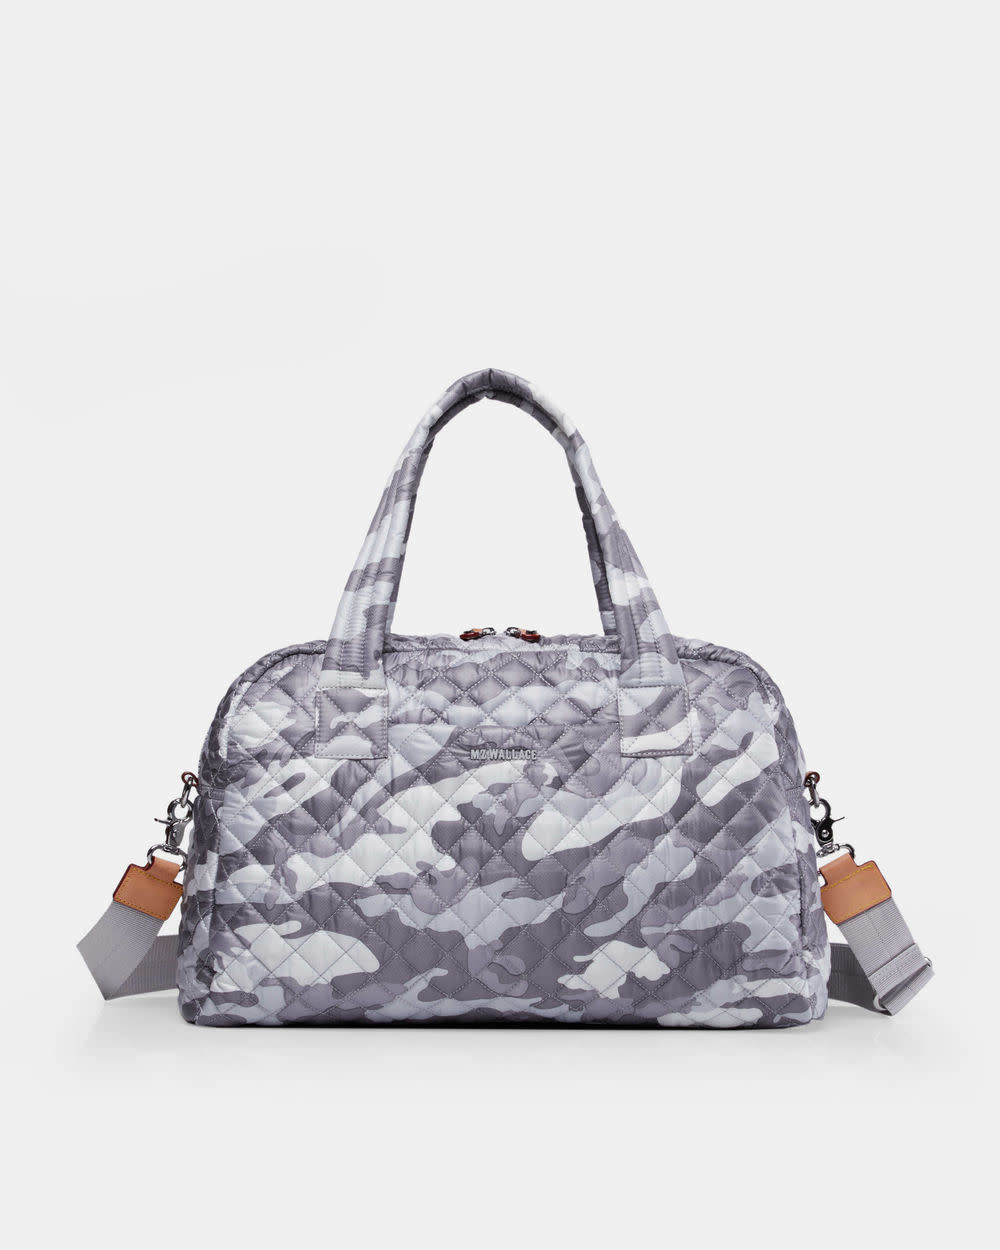 MZ WALLACE Jimmy Small Travel Bag, Light Gray Camo, 12001401 - Touch of  Class